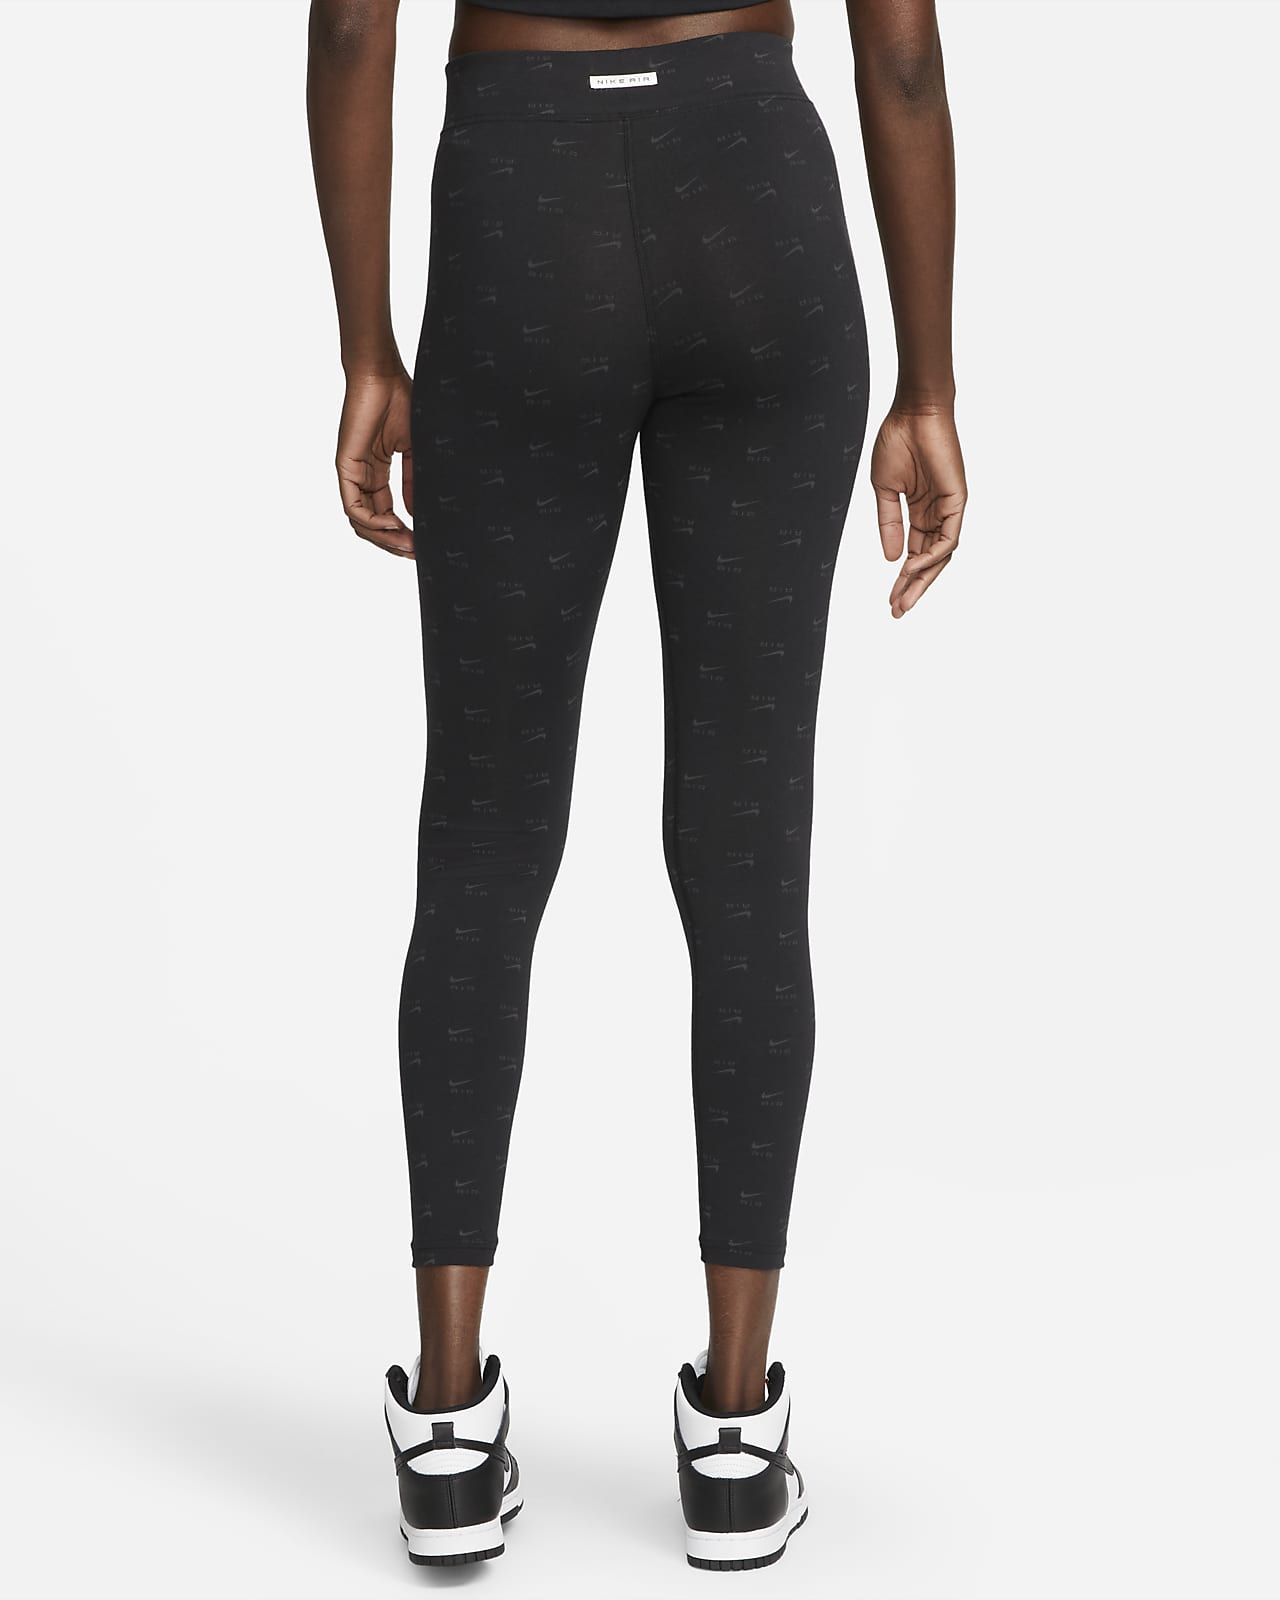 Nike Air Running Tights - Black - Womens, Compare